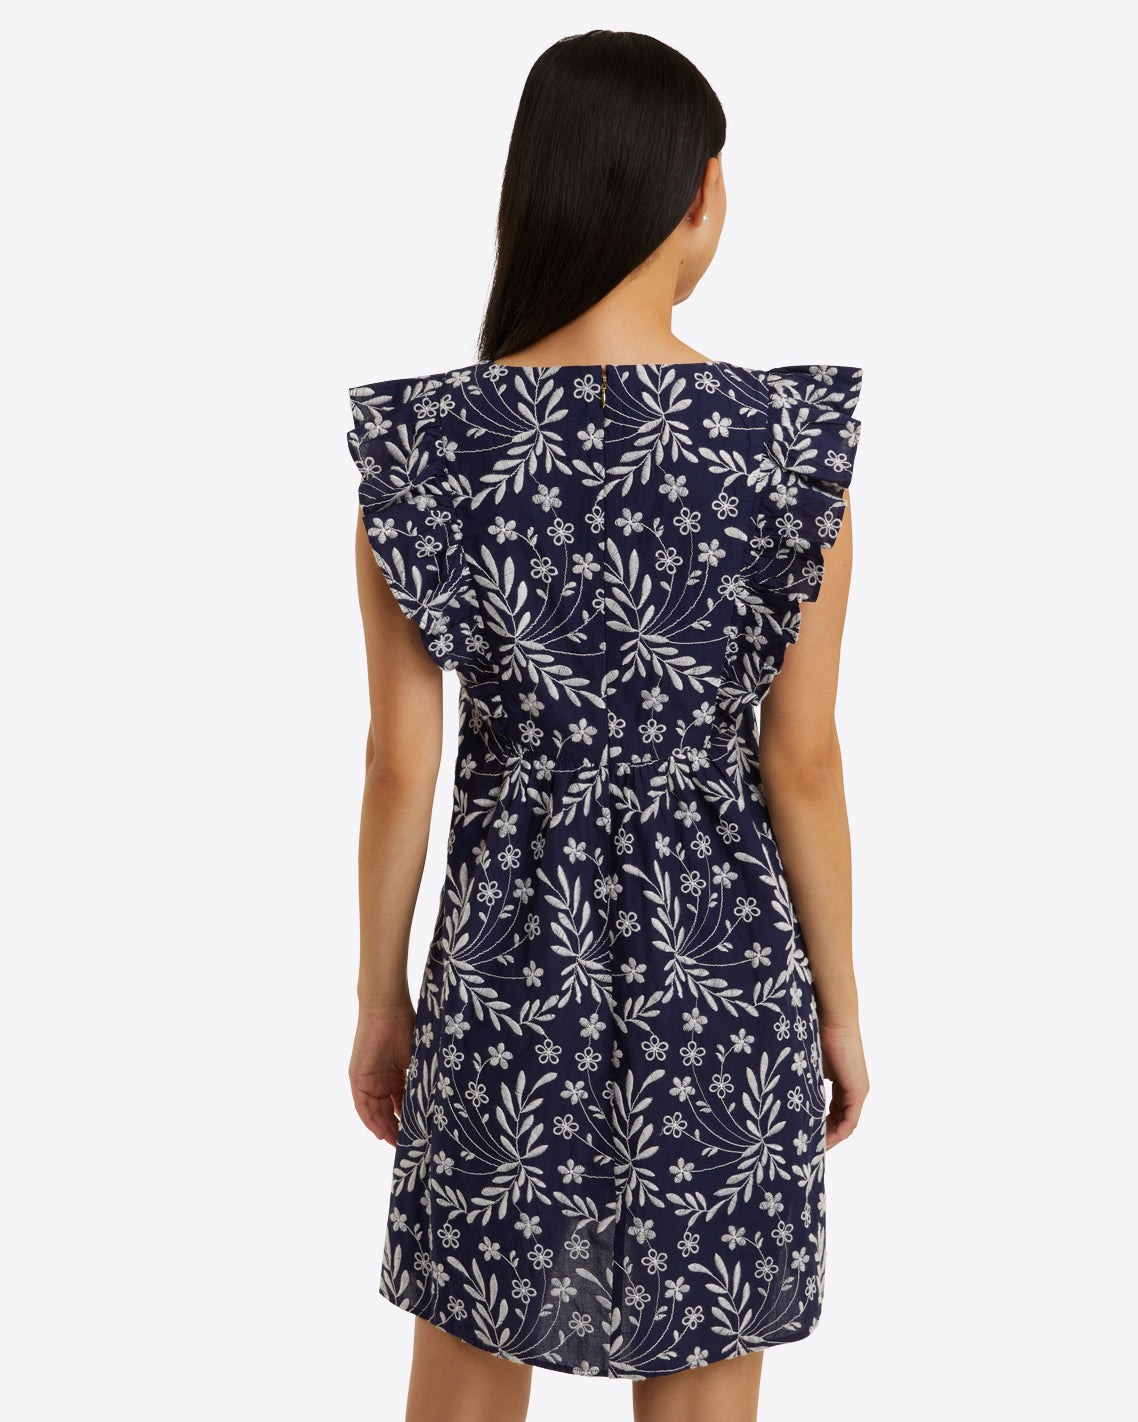 Ciara Babydoll Dress in Embroidered Floral